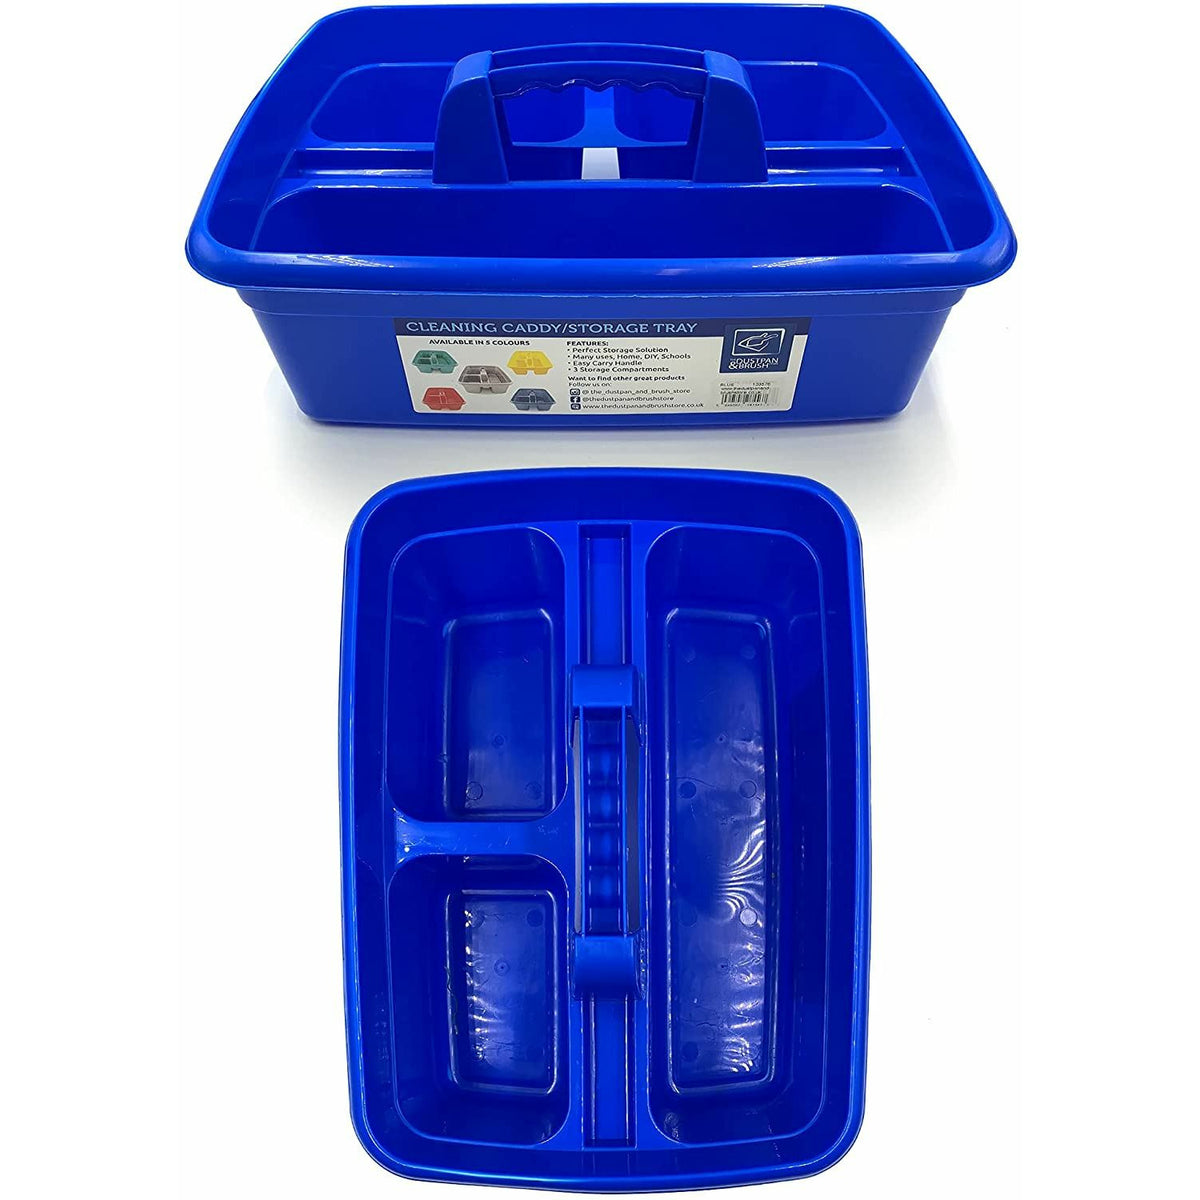 Blue Plastic Caddy Cleaners Carry All Storage Tote Tray Basket for Bottles etc